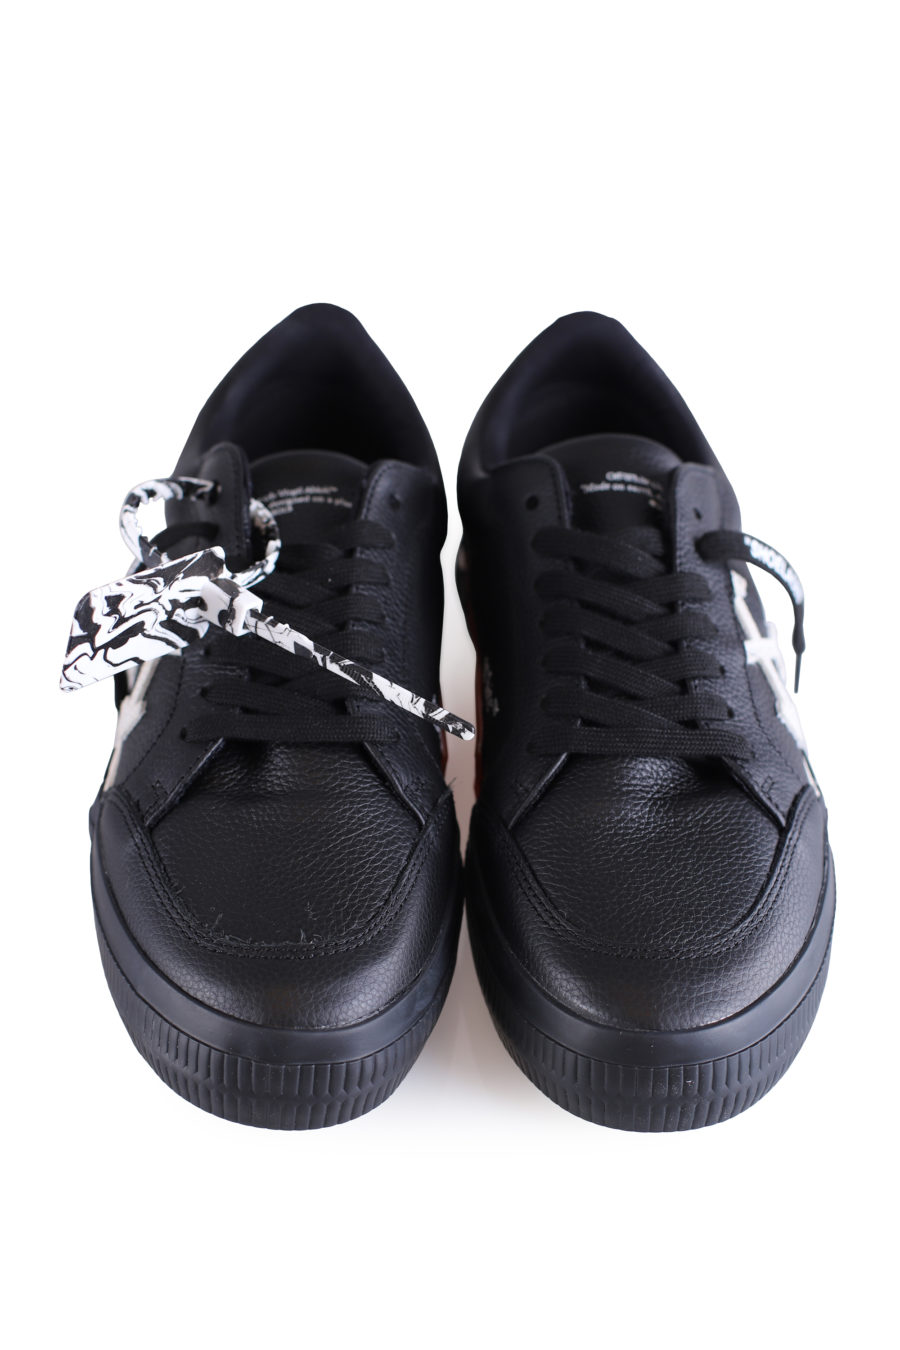 Black "Vulcanized" leather trainers - IMG 0678